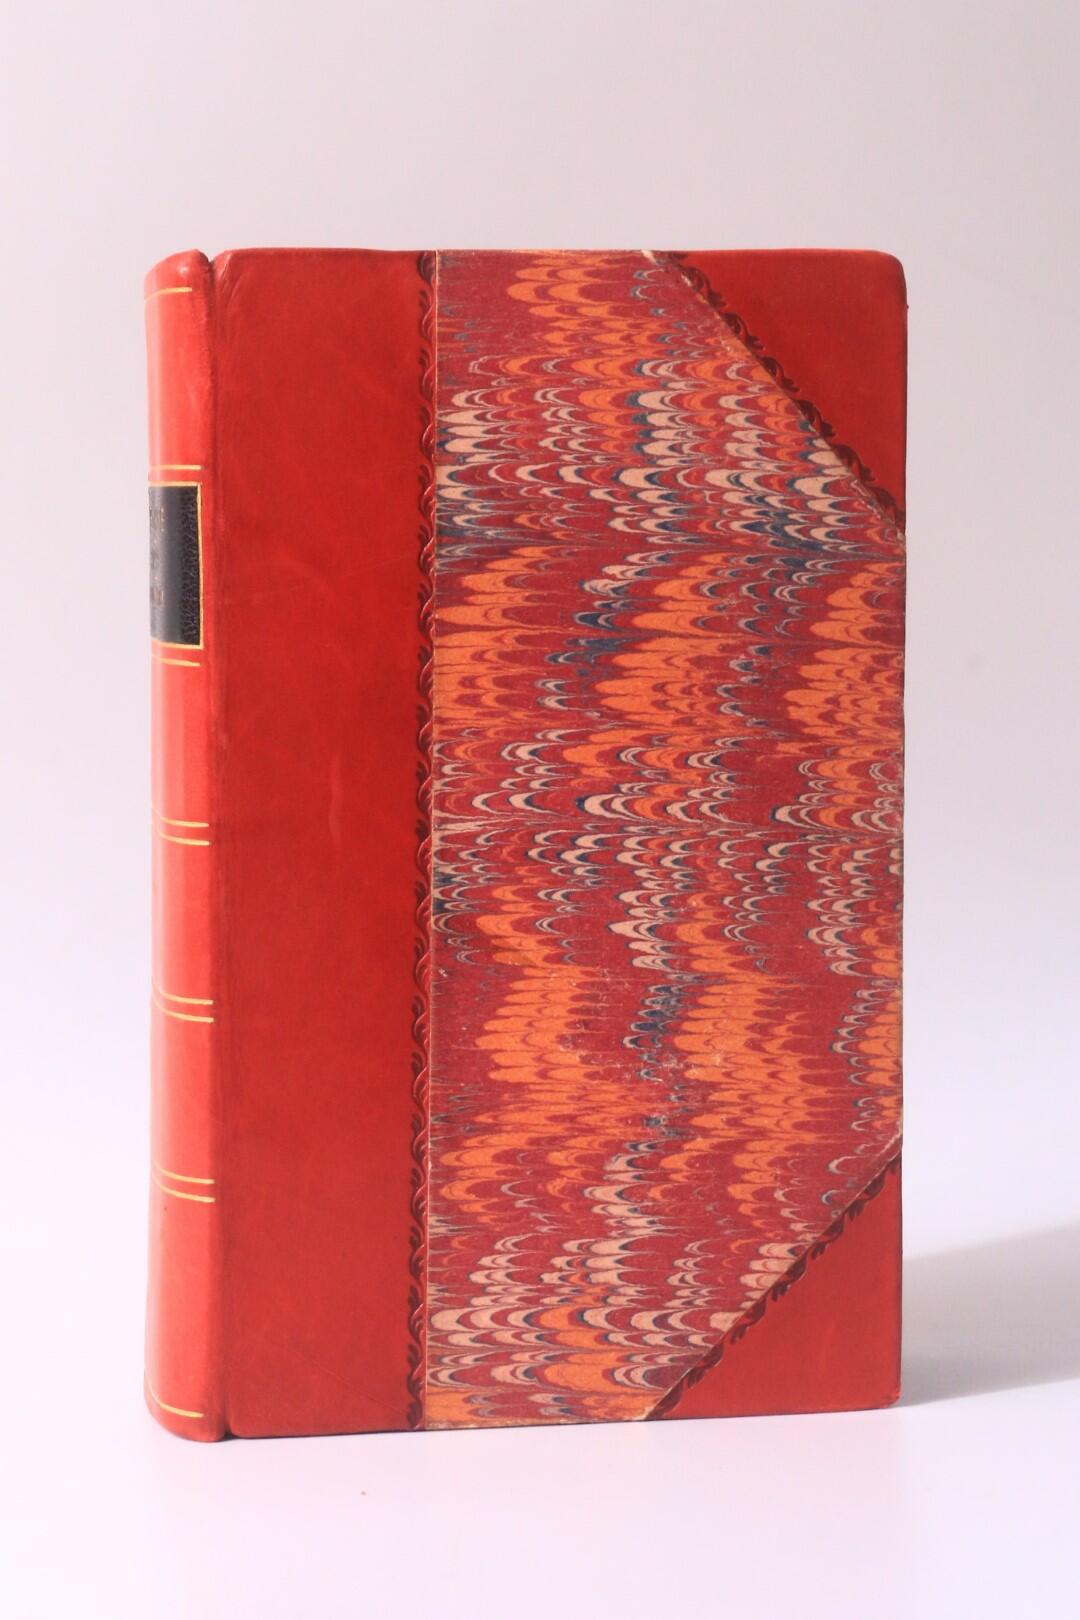 Egerton Smith - The Melange: a Variety of Original Pieces in Prose and Verse, comprising the Elysium of Animals - Simpkin & Marshall / Egerton Smith, 1834, First Edition.